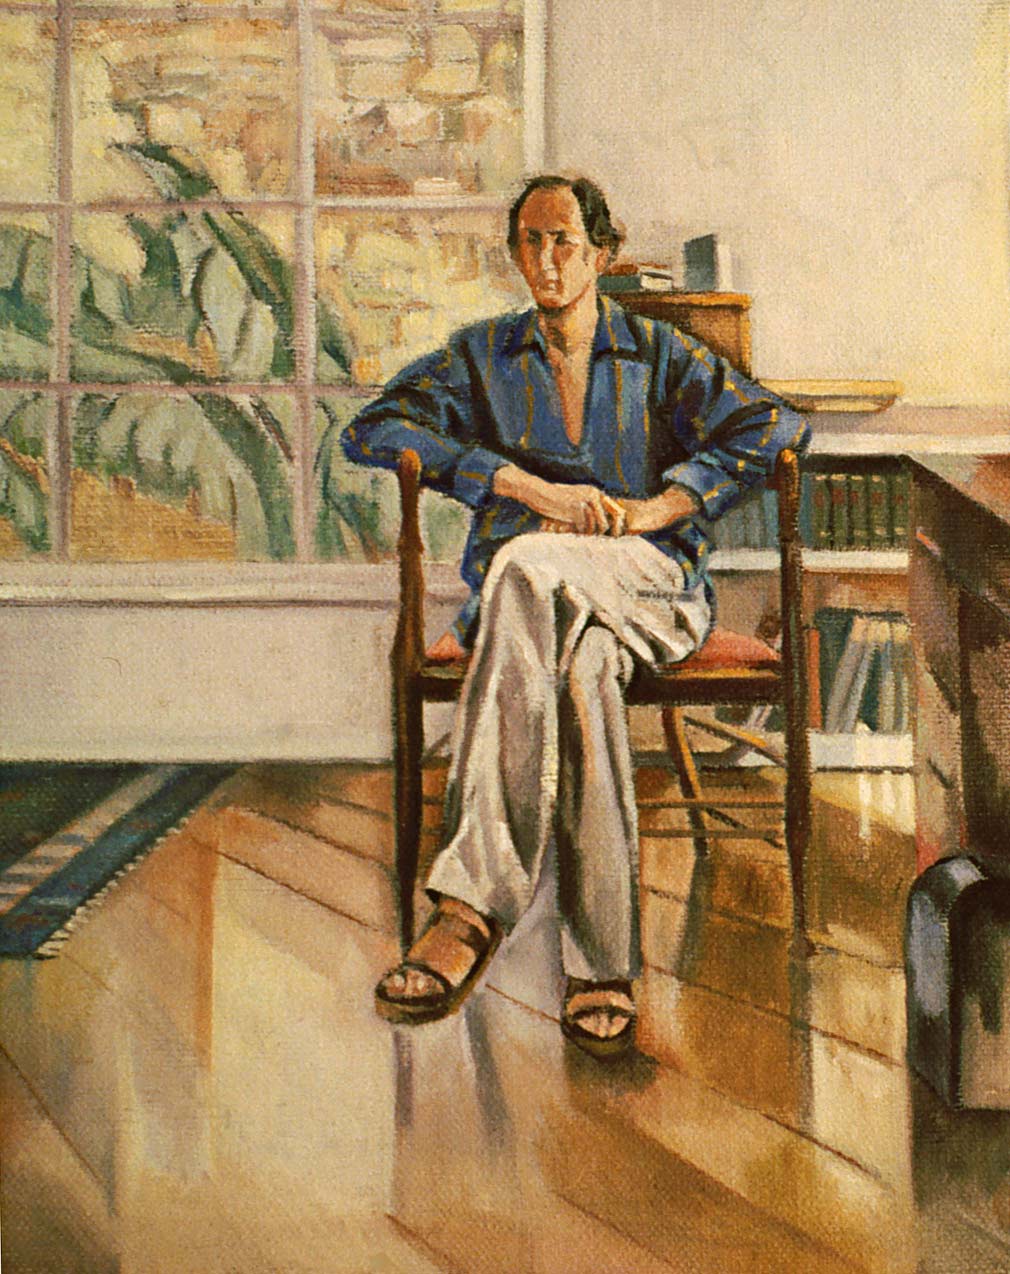 Portrait of Peter Maris (Architect) by Ethel Fisher, 1978, oil on canvas, 10 x 8 inches, twentieth century figure painting.